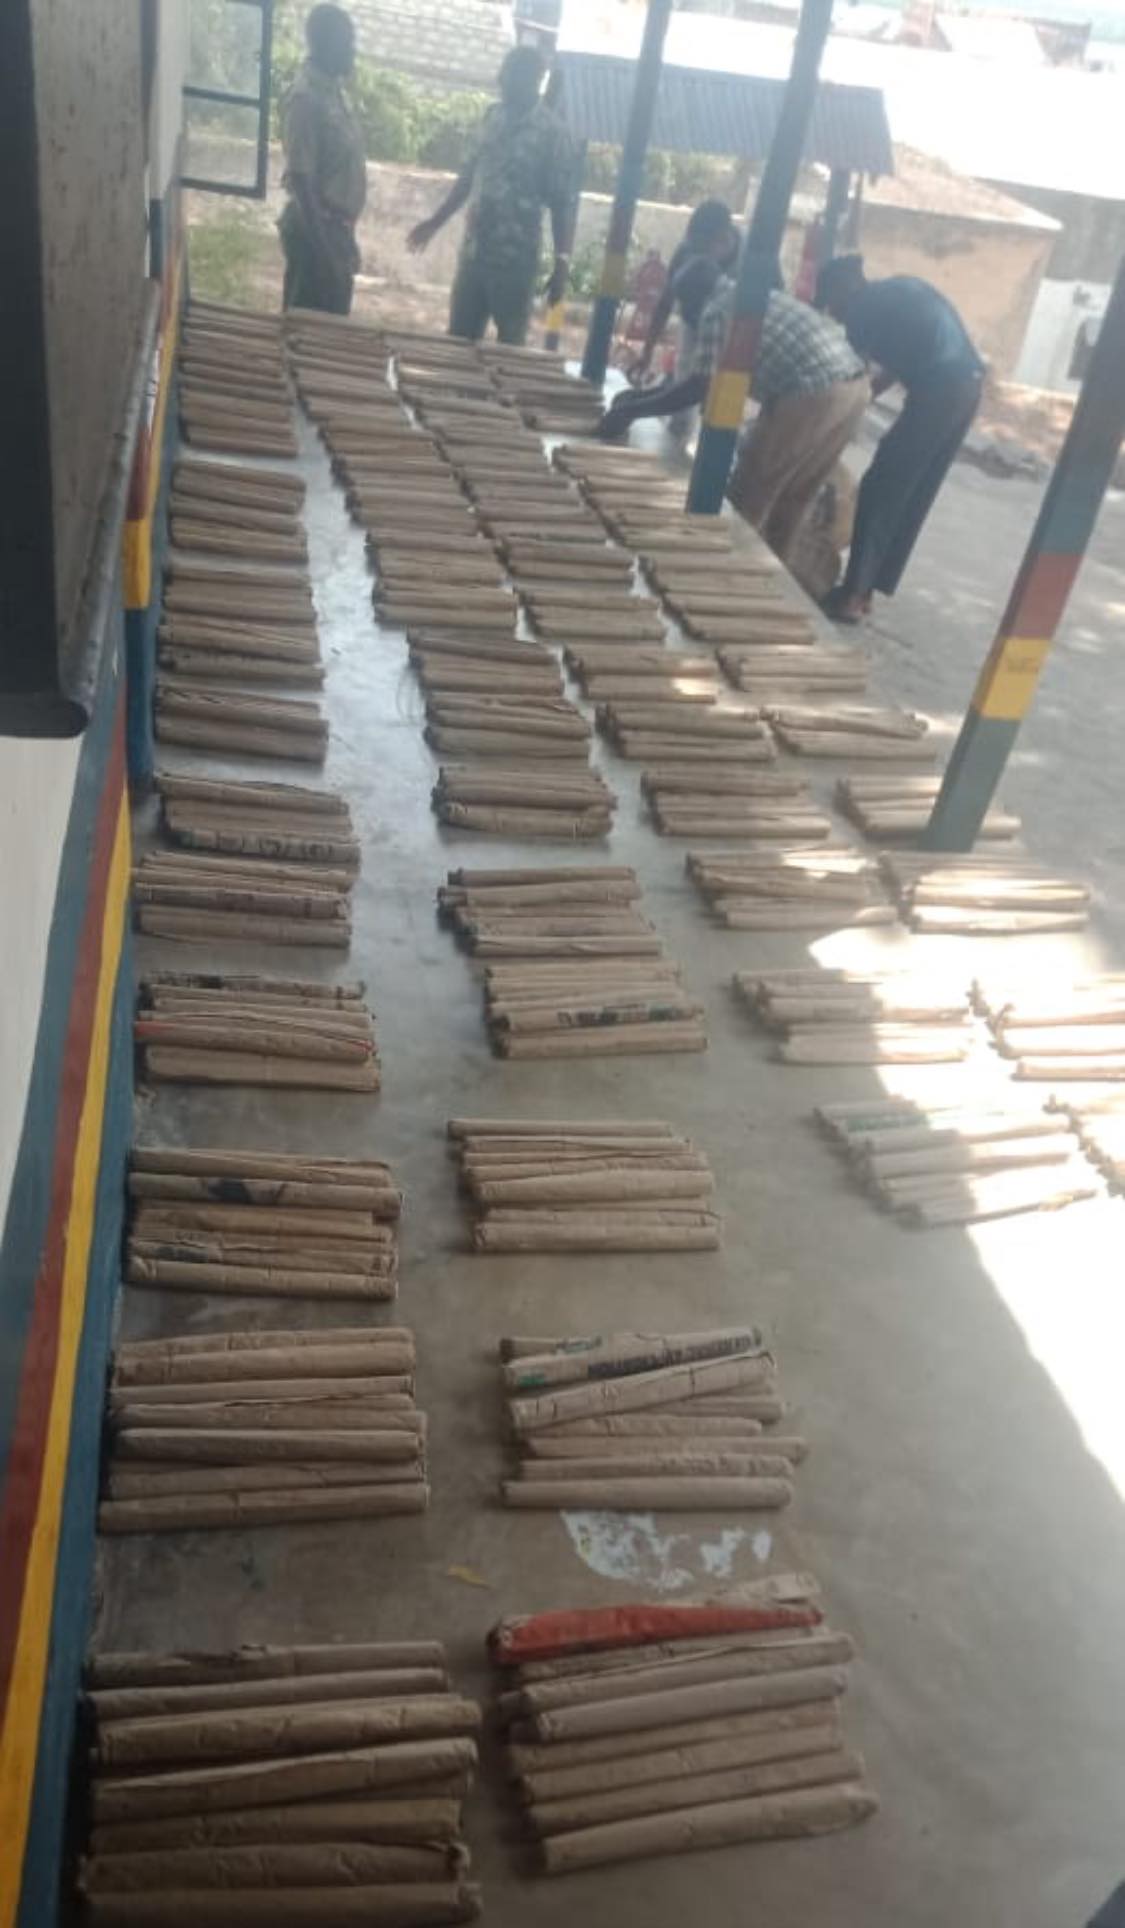 Dramatic arrest at sea as consignment of Bhang is seized